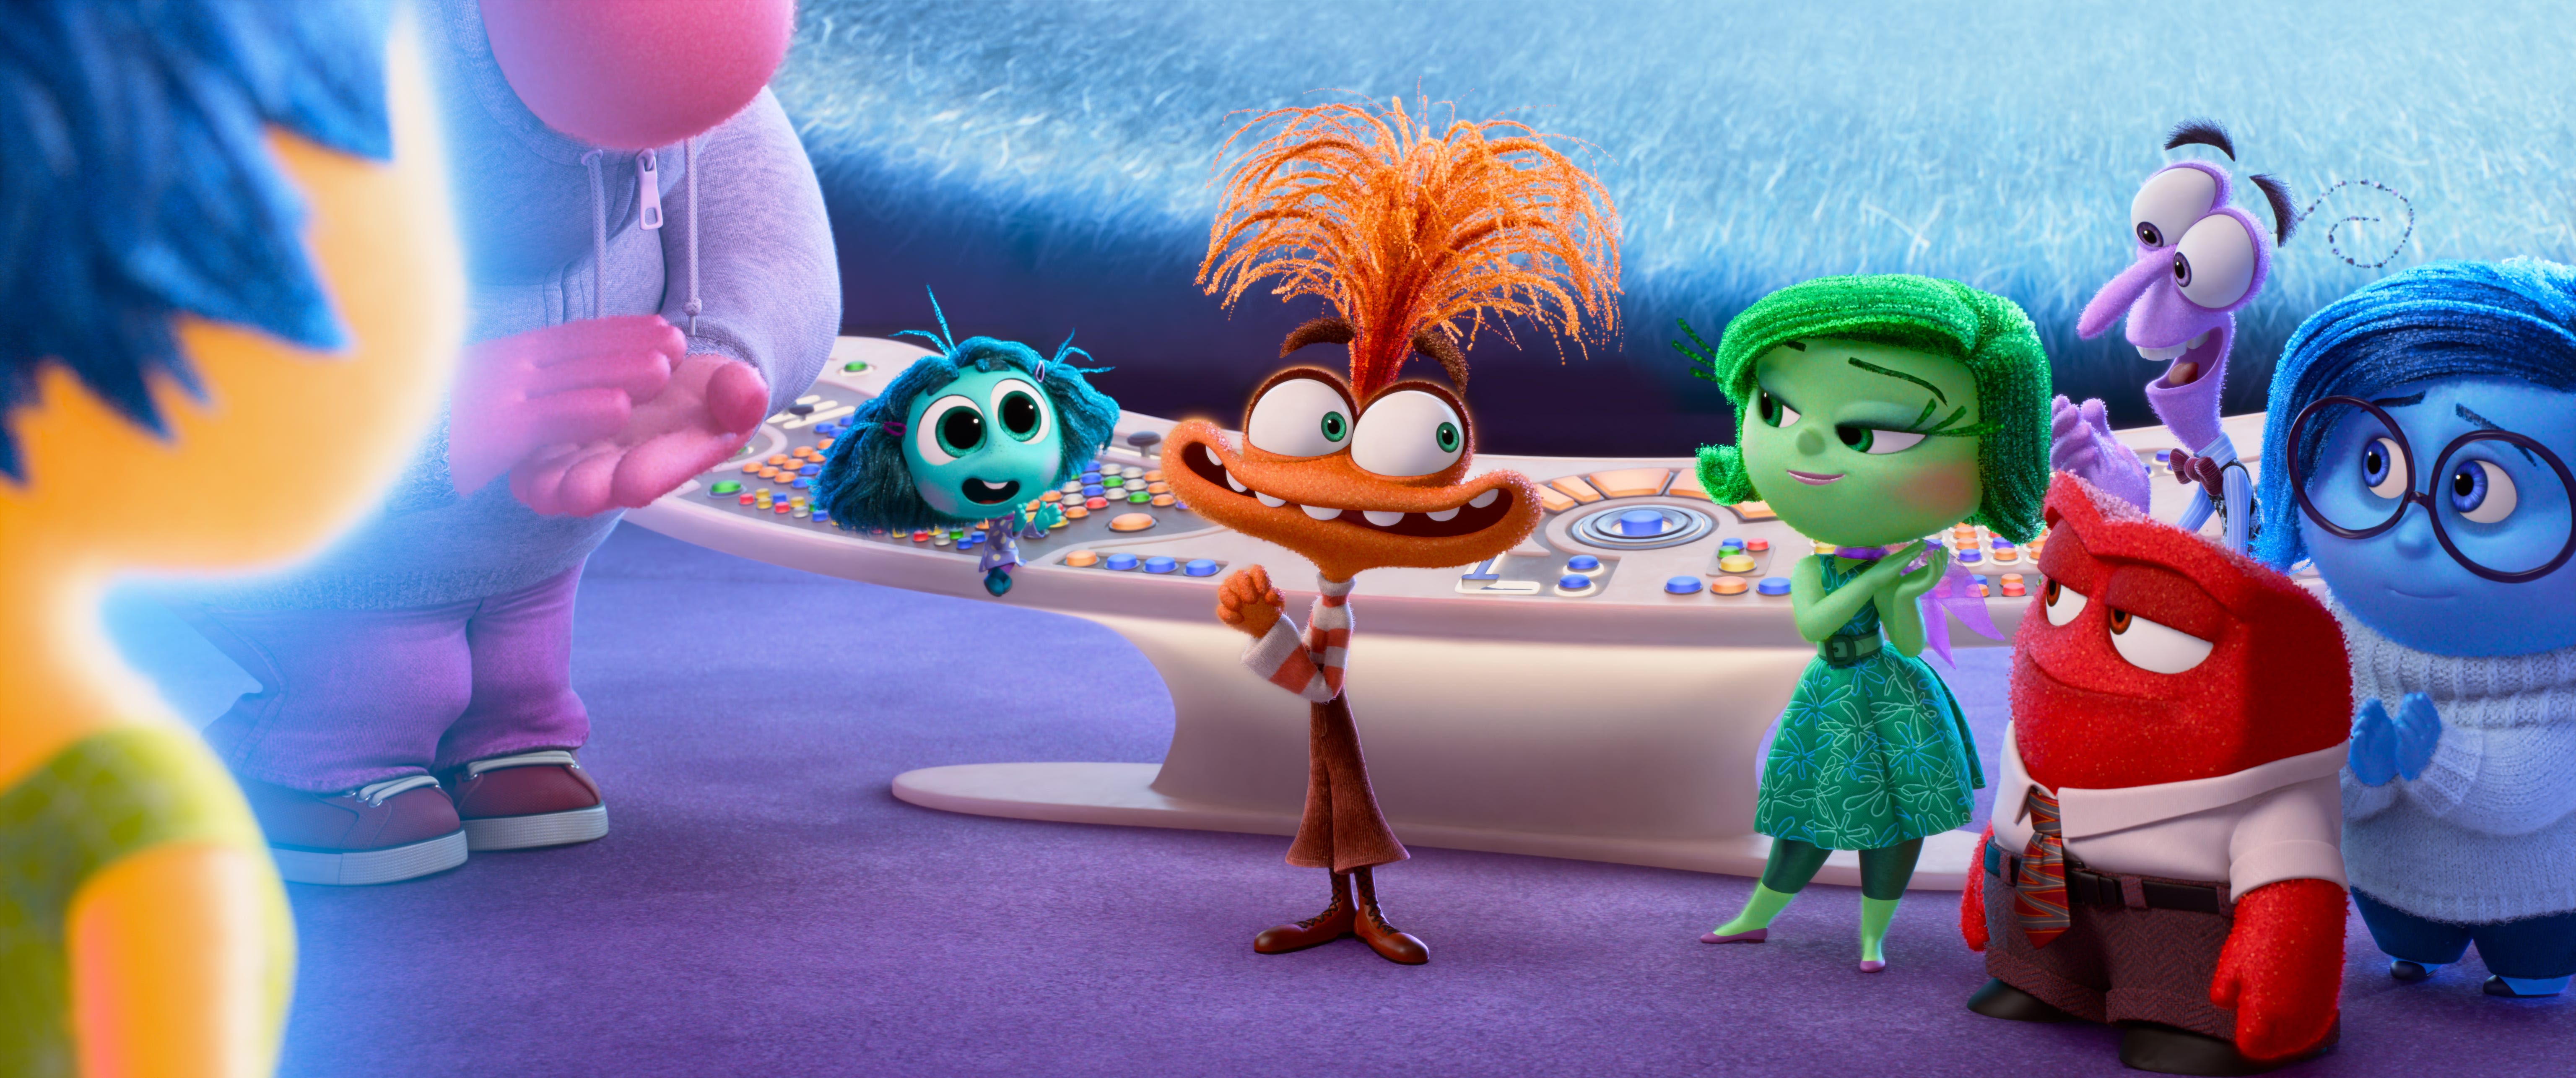 The biggest since 'Barbie': Pixar's 'Inside Out 2' debuts with huge $155M weekend